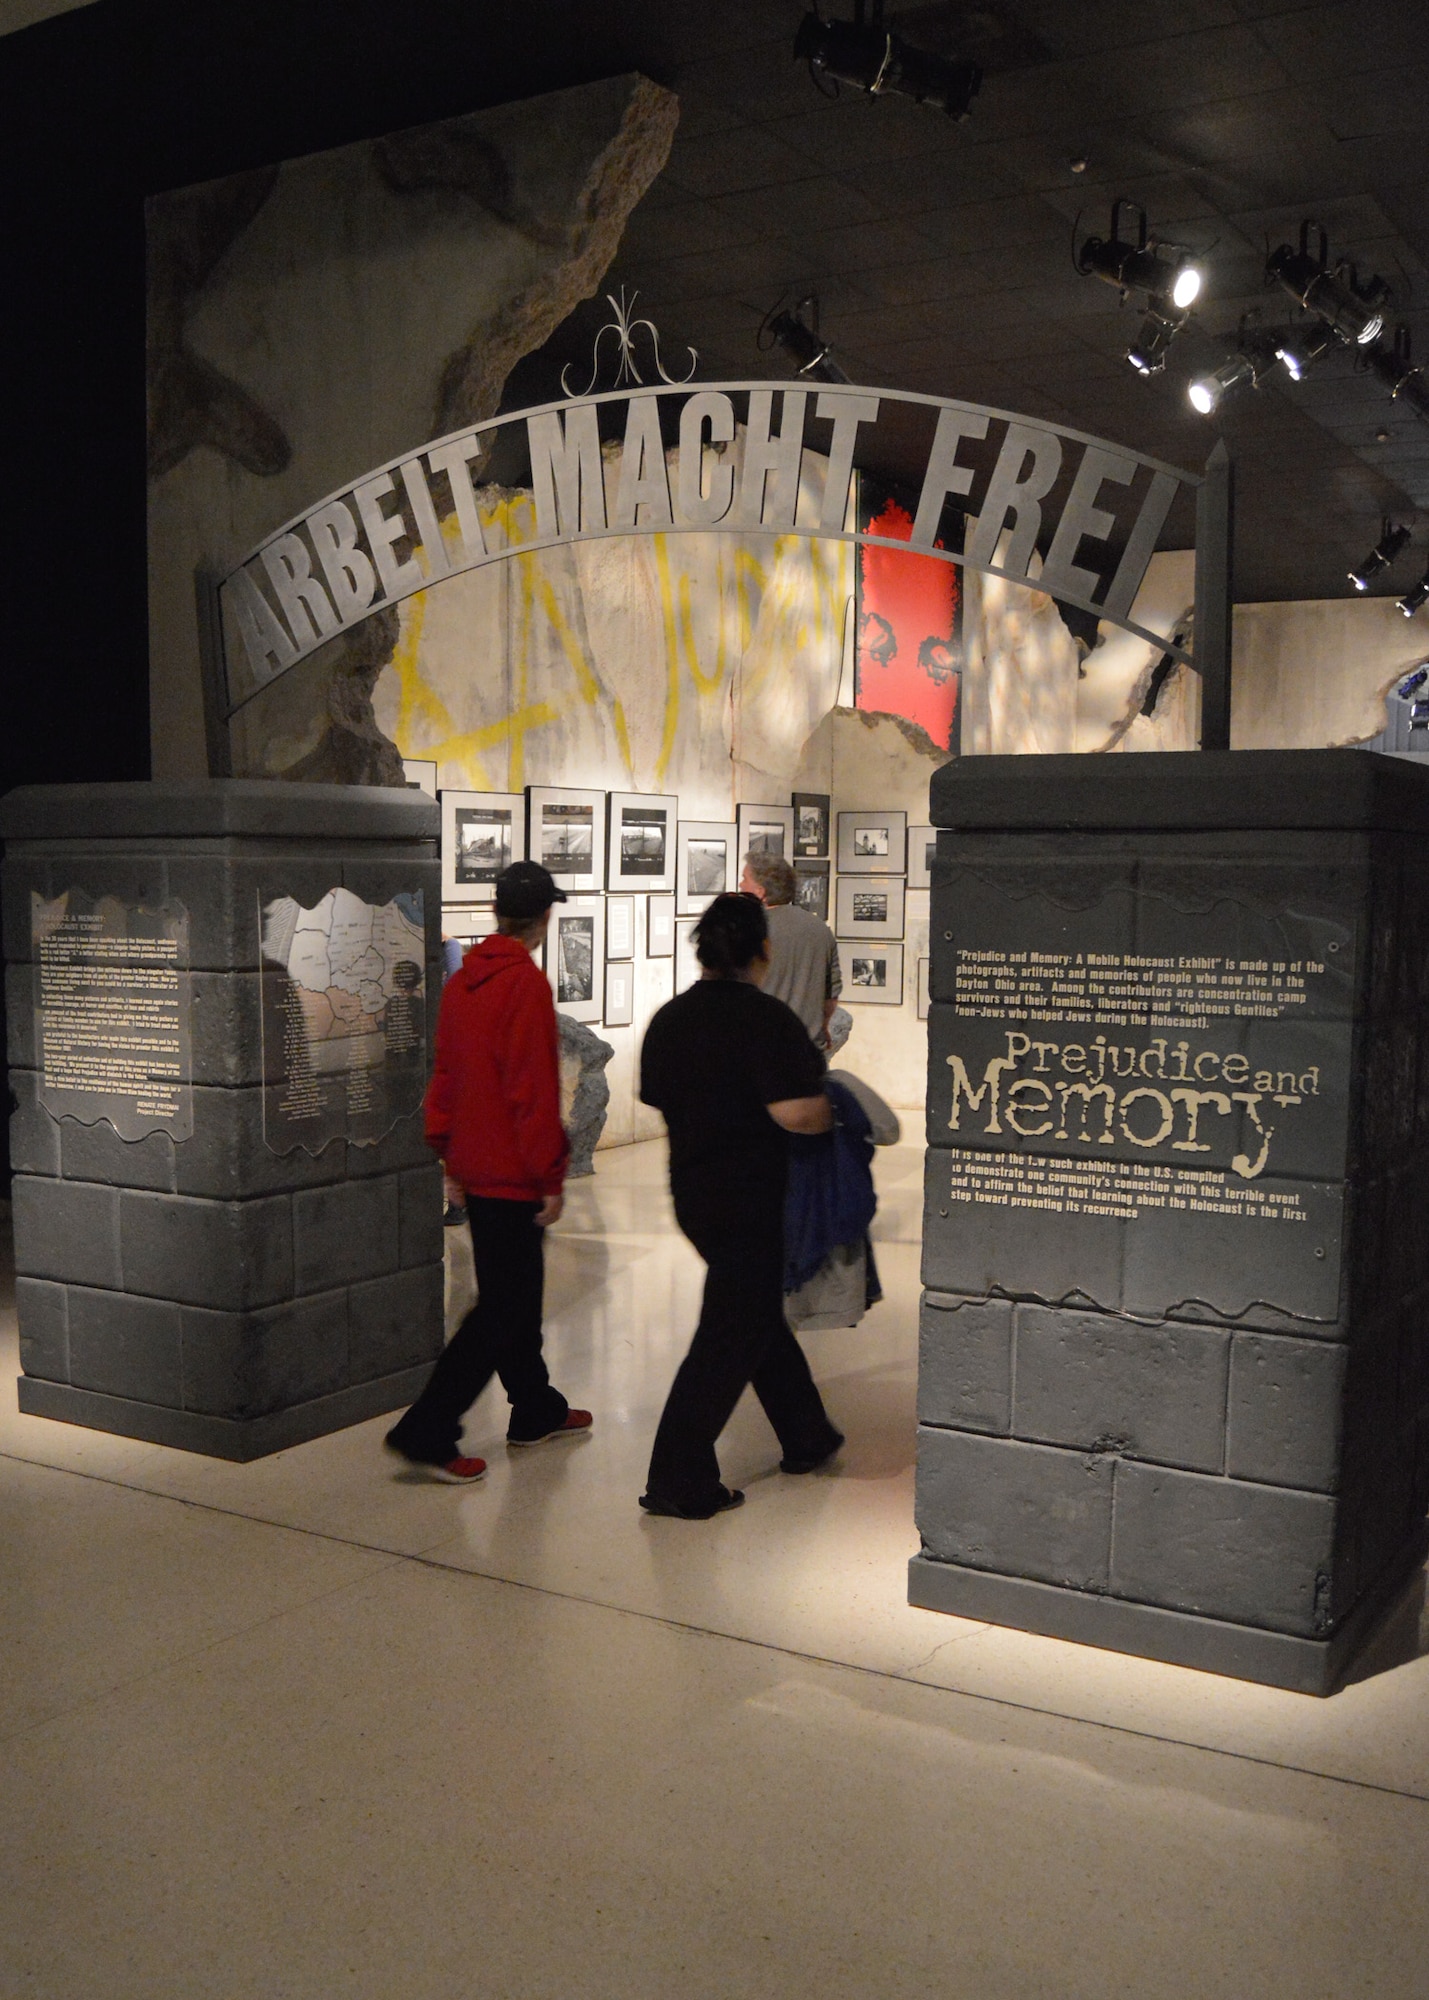 DAYTON, Ohio -- "Prejudice & Memory: A Holocaust Exhibit" at the National Museum of the U.S. Air Force. (U.S. Air Force photo)